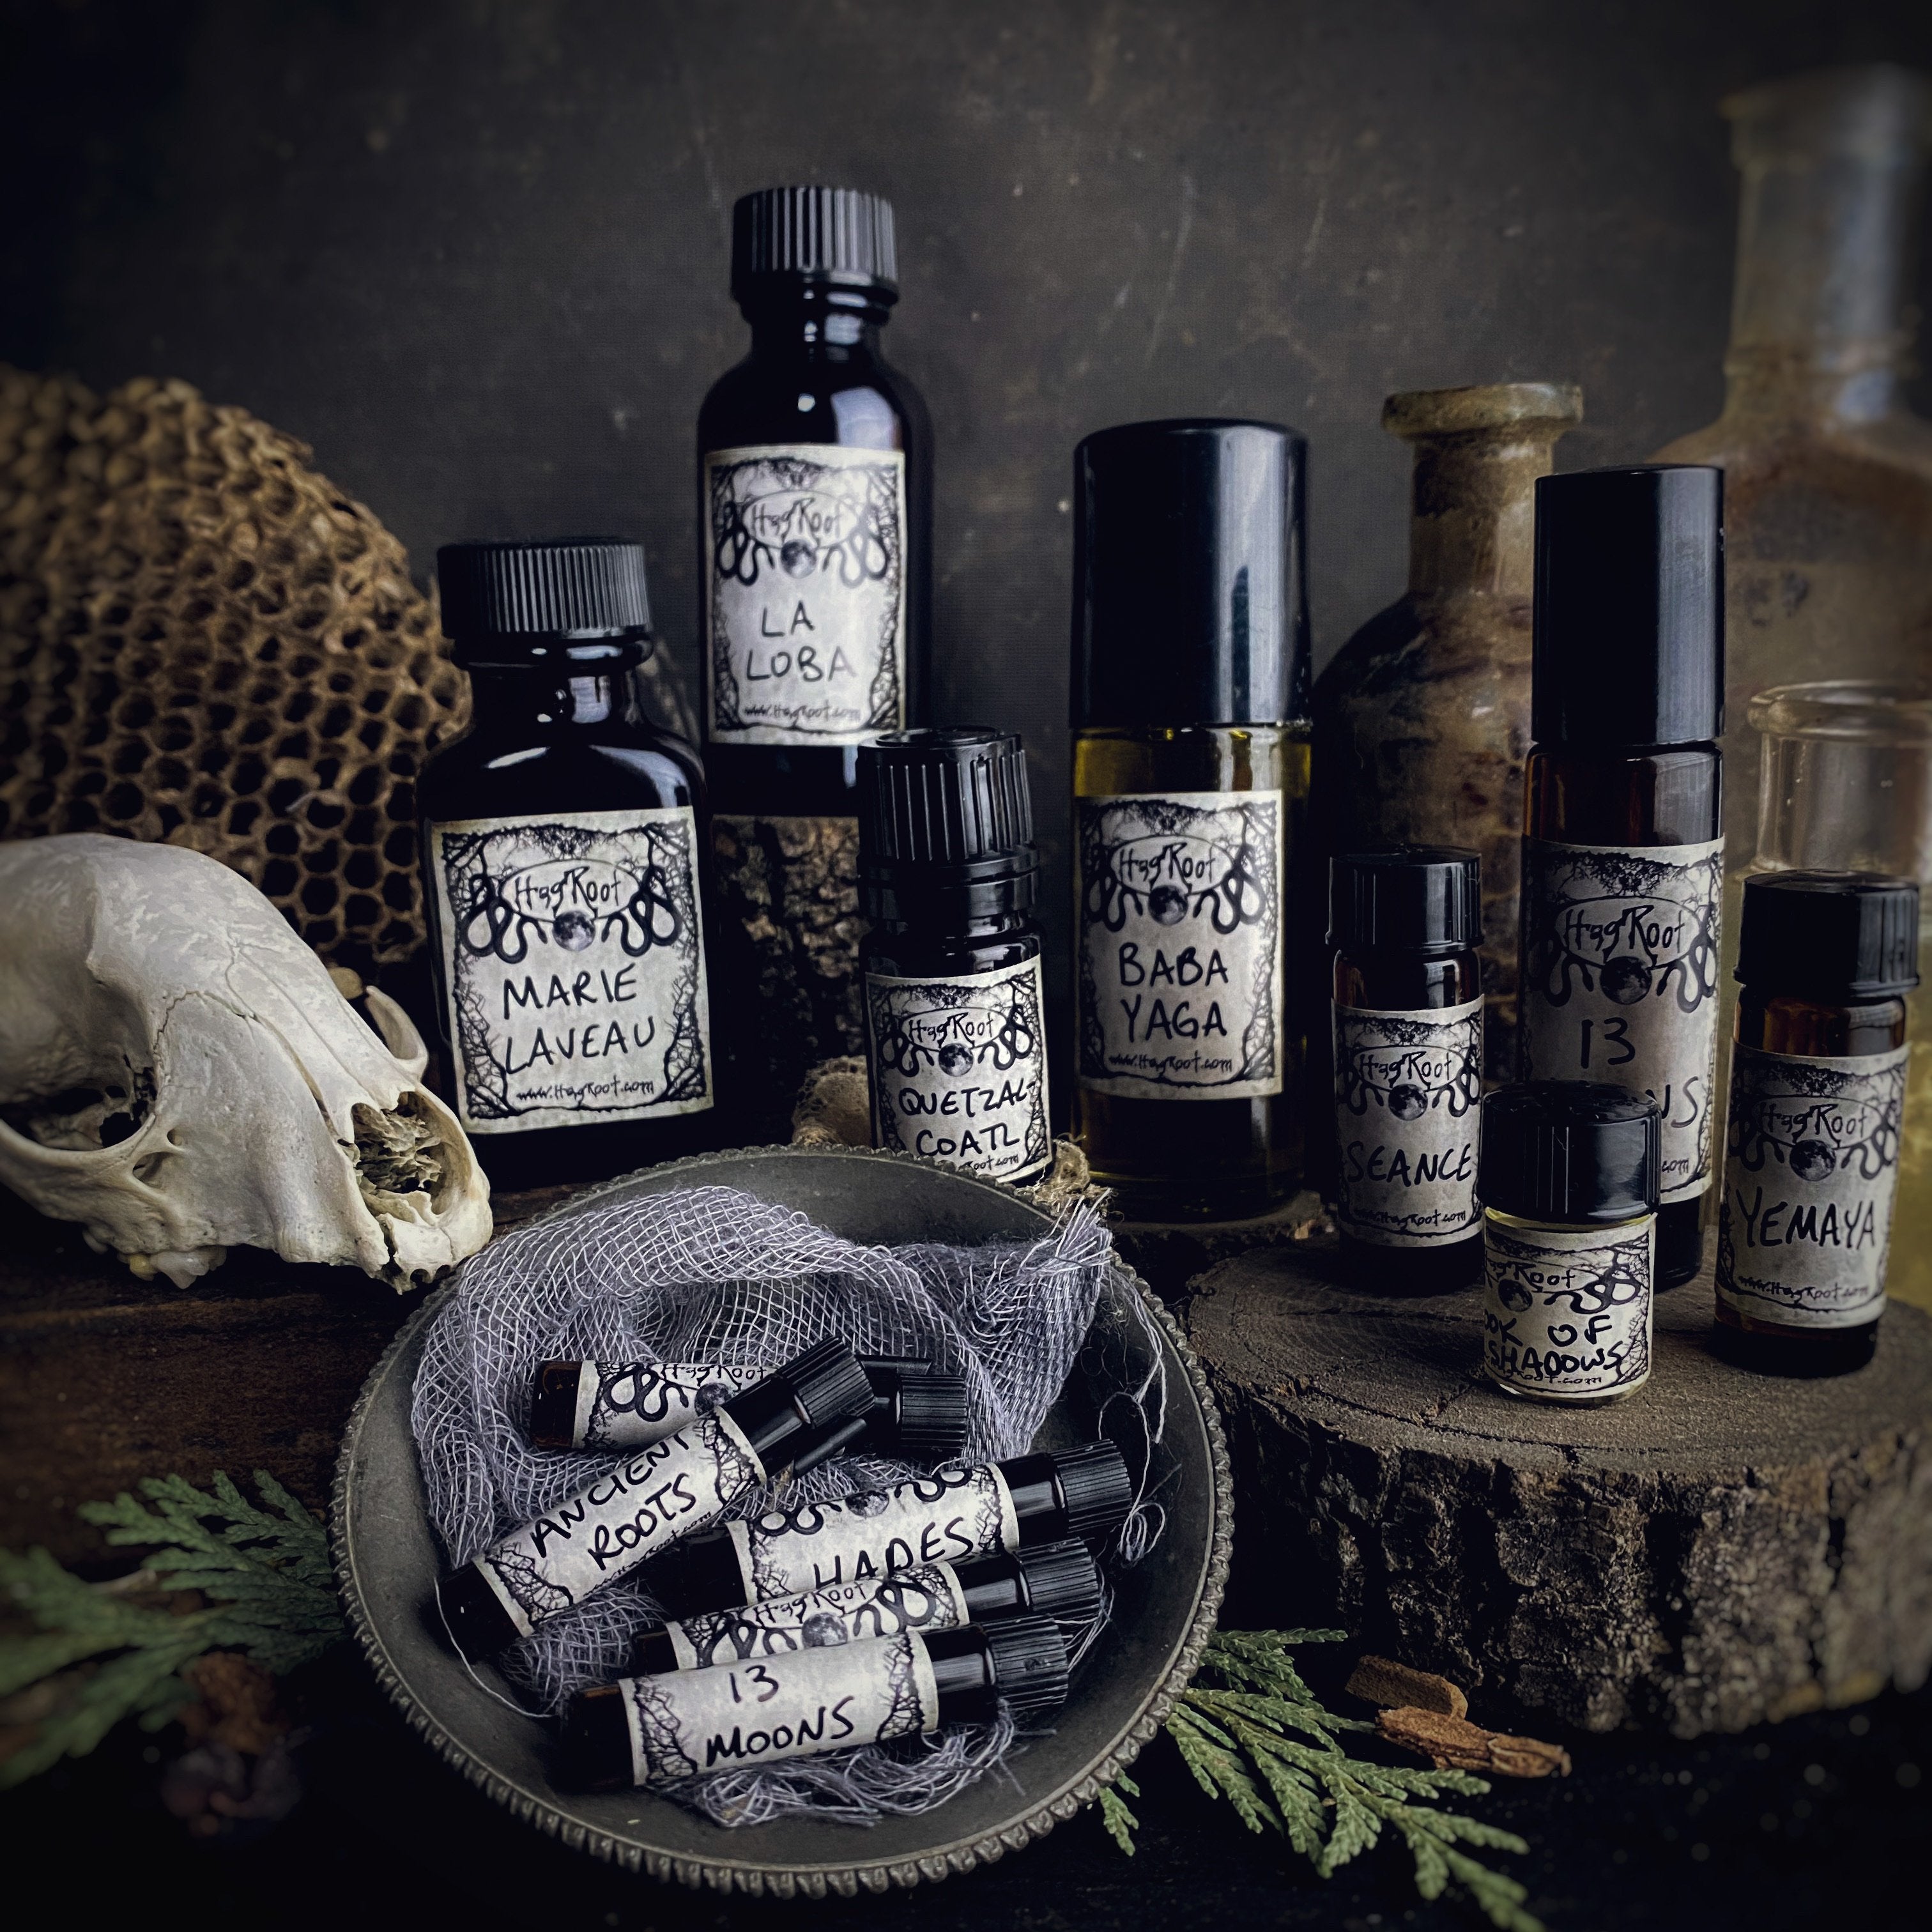 WINTER CRONE-(Snow Covered Evergreen Forests, Enchanting, Vanilla, Ceremonial Fire, Dark Spices)-Perfume, Cologne, Anointing, Ritual Oil